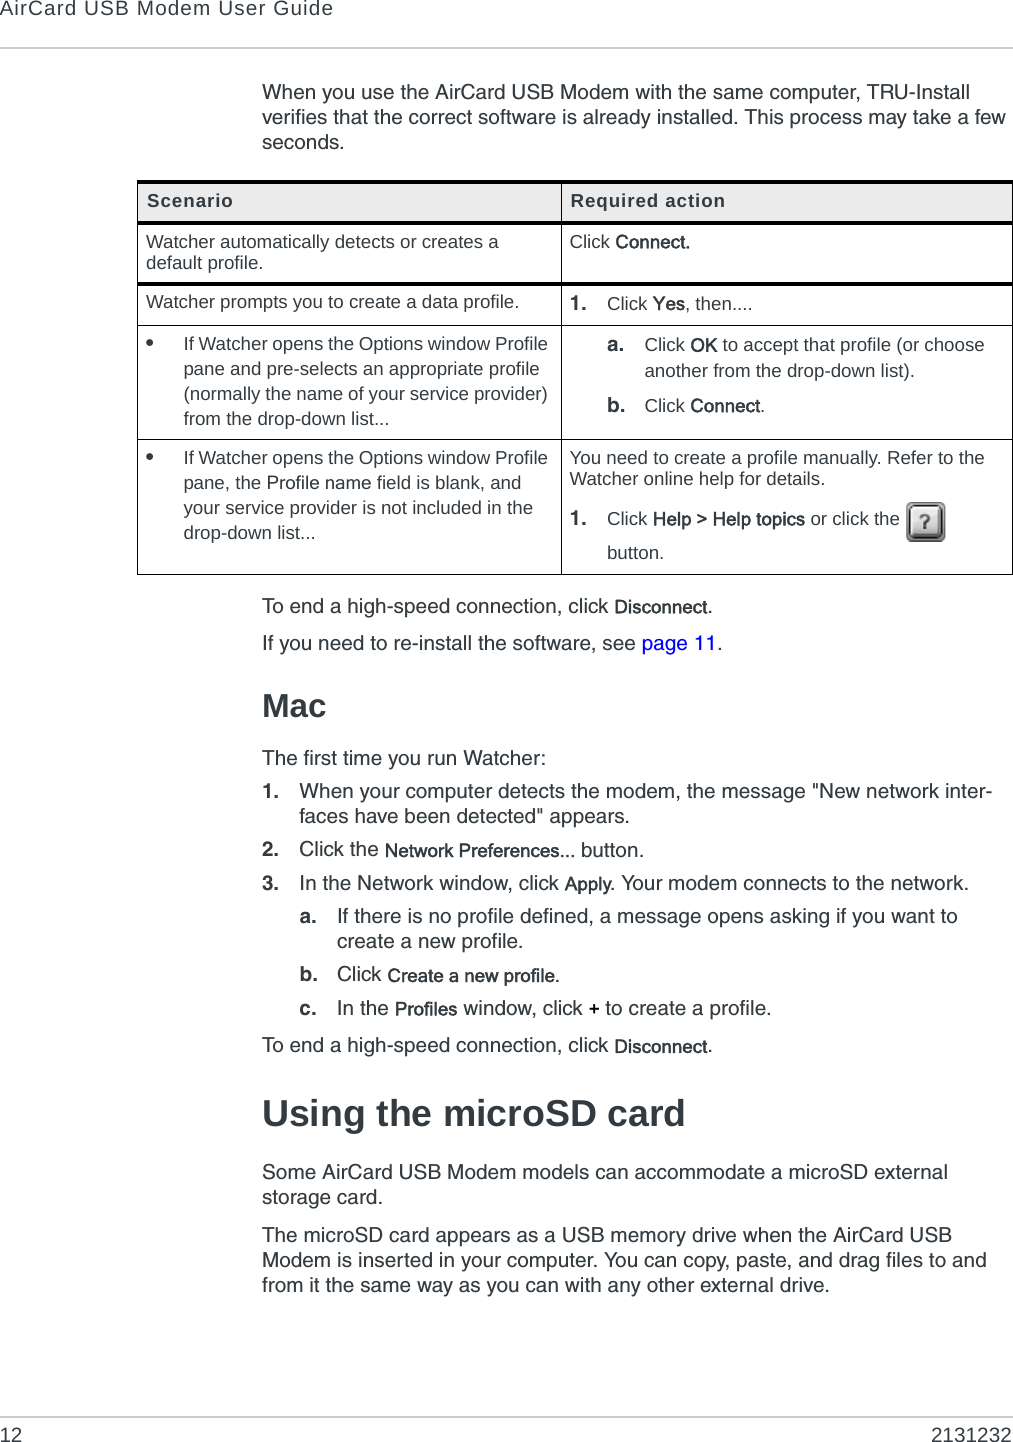 AirCard USB Modem User Guide12 2131232When you use the AirCard USB Modem with the same computer, TRU-Install verifies that the correct software is already installed. This process may take a few seconds. To end a high-speed connection, click Disconnect.If you need to re-install the software, see page 11.MacThe first time you run Watcher:1. When your computer detects the modem, the message &quot;New network inter-faces have been detected&quot; appears. 2. Click the Network Preferences... button.3. In the Network window, click Apply. Your modem connects to the network.a. If there is no profile defined, a message opens asking if you want to create a new profile.b. Click Create a new profile.c. In the Profiles window, click + to create a profile.To end a high-speed connection, click Disconnect.Using the microSD cardSome AirCard USB Modem models can accommodate a microSD external storage card.The microSD card appears as a USB memory drive when the AirCard USB Modem is inserted in your computer. You can copy, paste, and drag files to and from it the same way as you can with any other external drive.Scenario Required actionWatcher automatically detects or creates a default profile. Click Connect.Watcher prompts you to create a data profile. 1. Click Yes, then....•If Watcher opens the Options window Profile pane and pre-selects an appropriate profile (normally the name of your service provider) from the drop-down list...a. Click OK to accept that profile (or choose another from the drop-down list).b. Click Connect.•If Watcher opens the Options window Profile pane, the Profile name field is blank, and your service provider is not included in the drop-down list...You need to create a profile manually. Refer to the Watcher online help for details. 1. Click Help &gt; Help topics or click the   button.